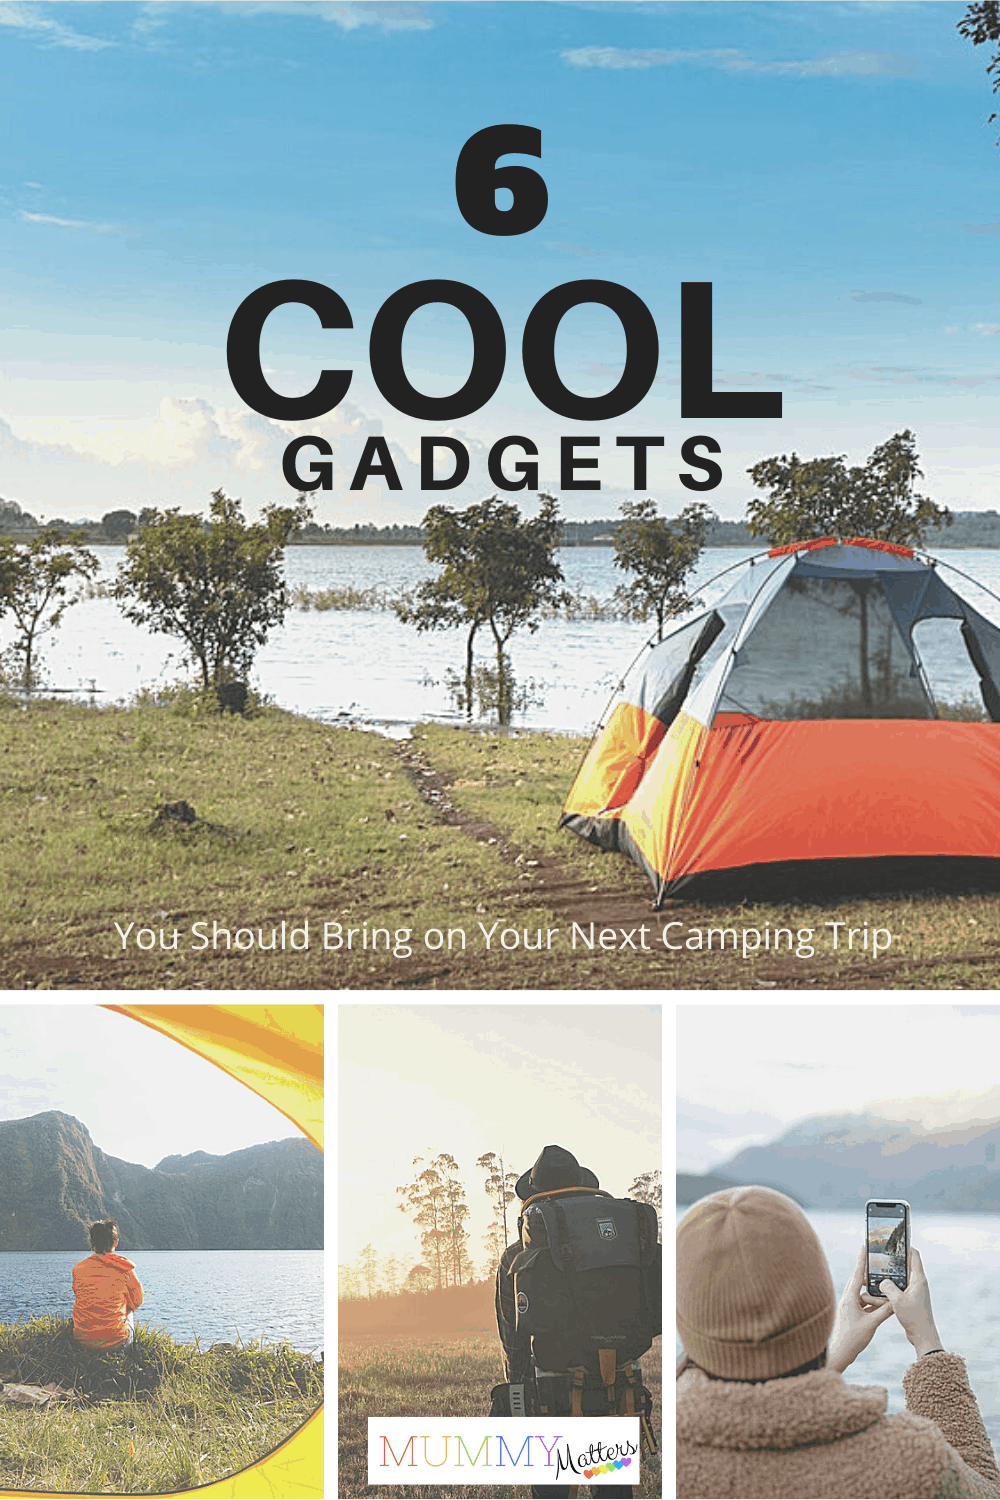 If you're planning your next camping trip you might want to check out our list of 6 cool gadgets you're going to want to pack for your best trip yet.